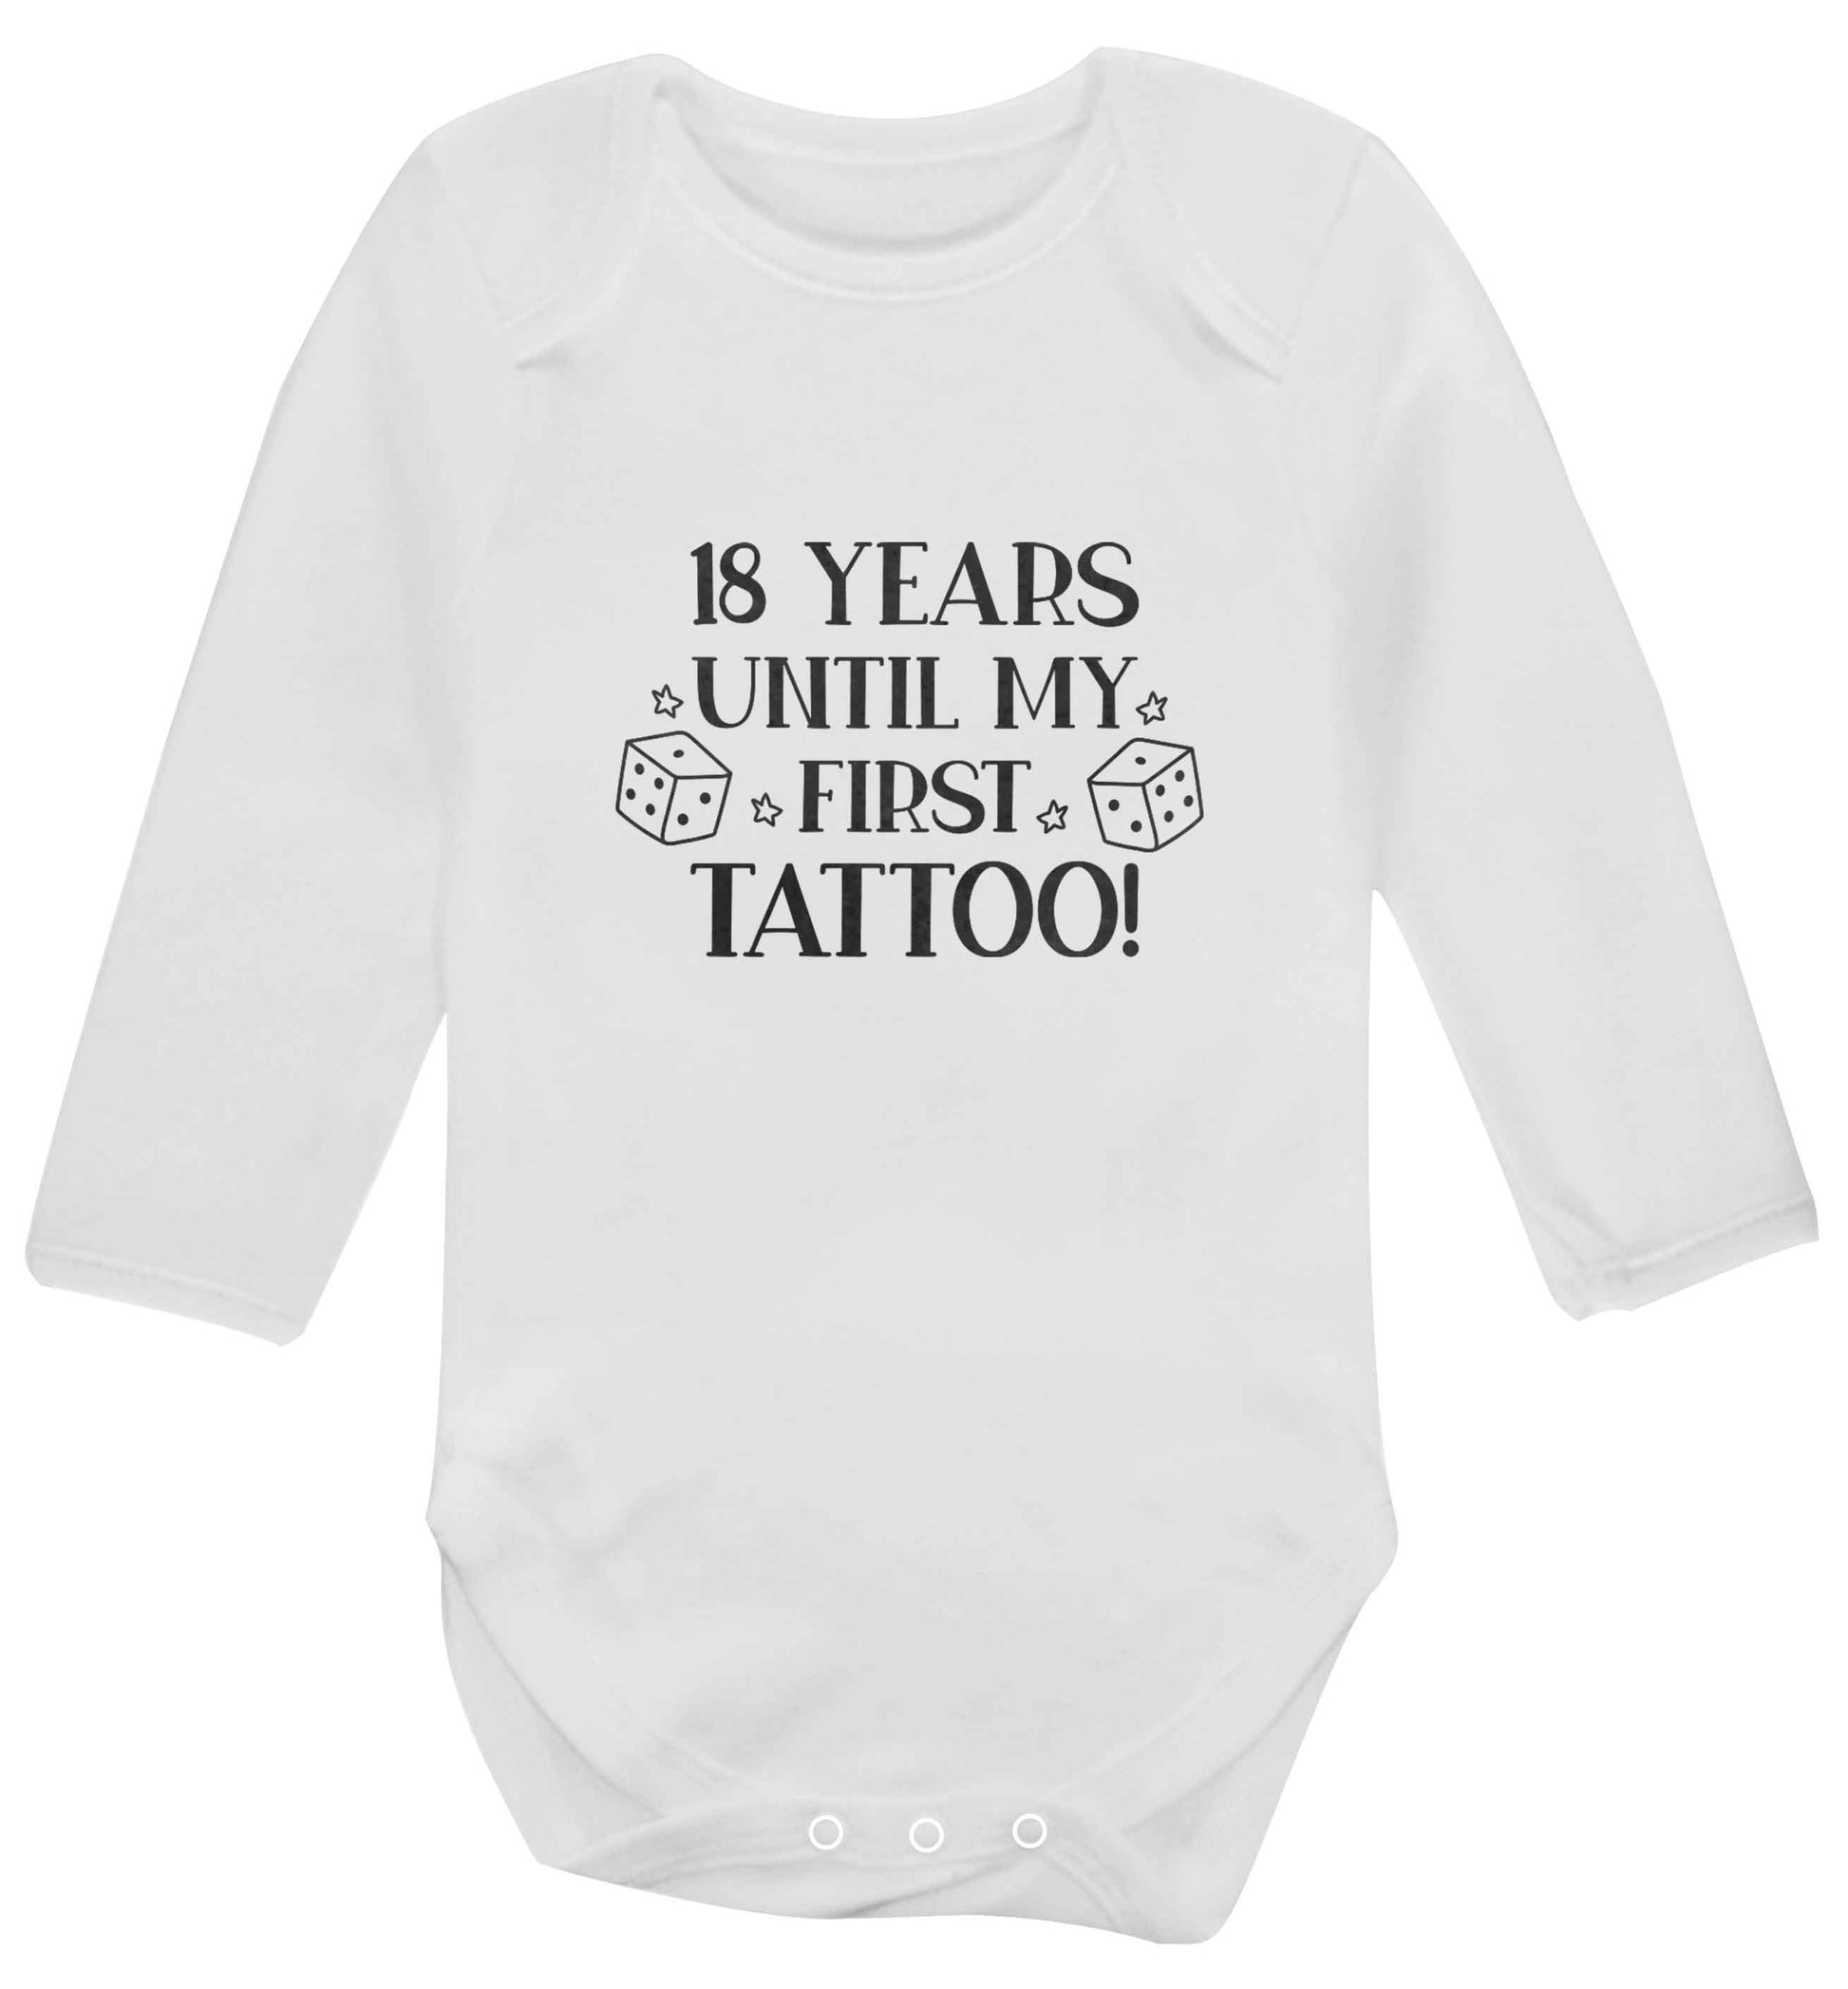 18 Years Until my First Tattoo baby vest long sleeved white 6-12 months